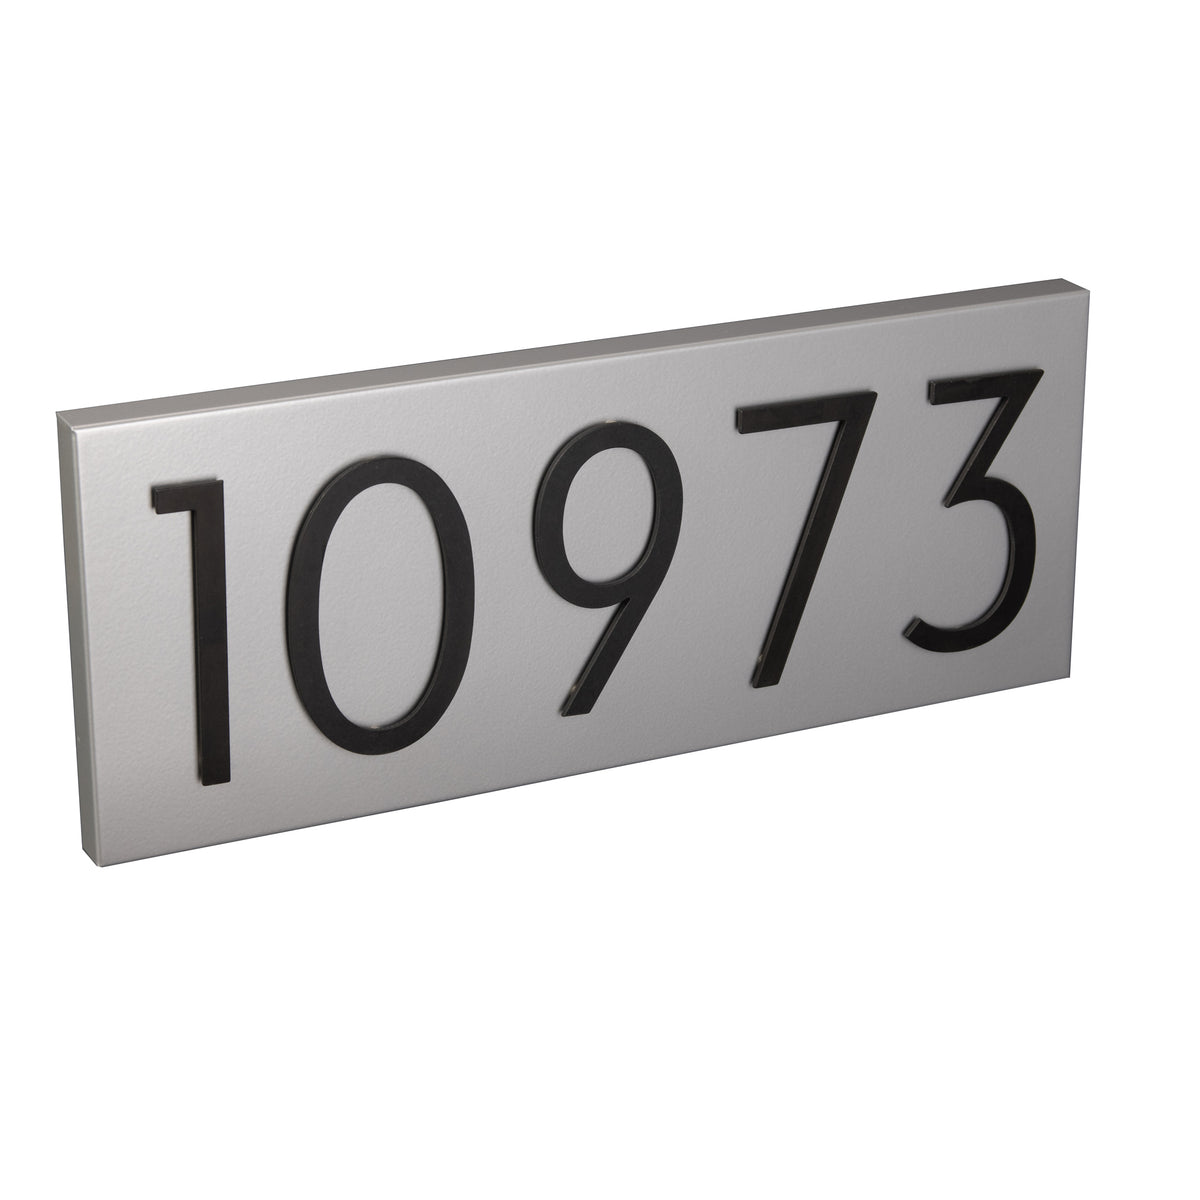 anodized aluminum effect address plaque with black numbers